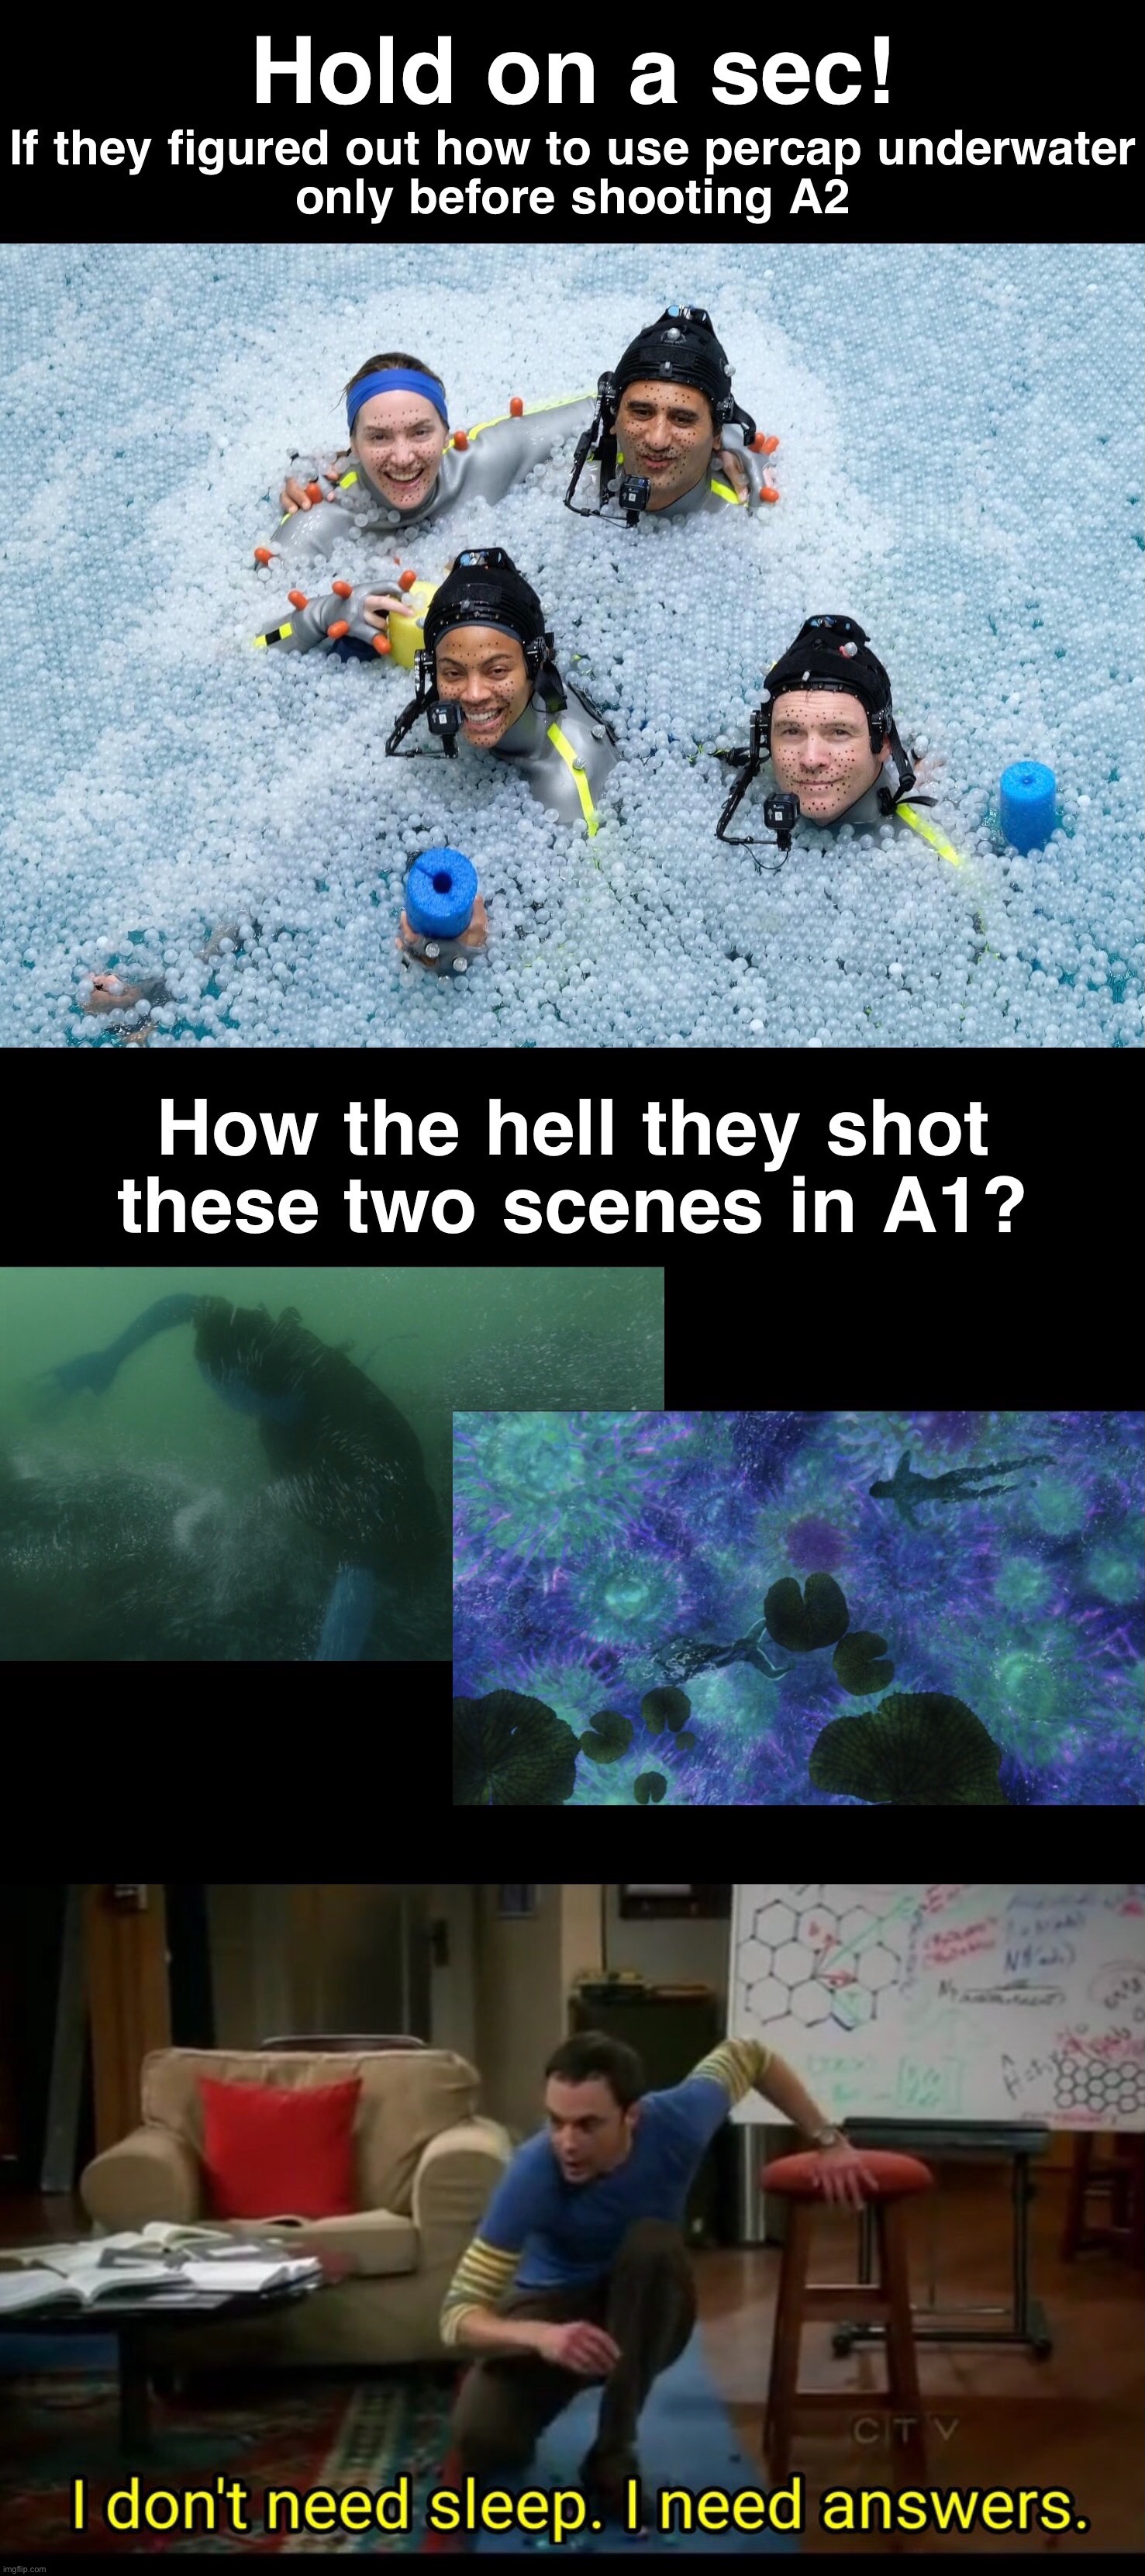 Avatar Underwater Performance Capture Meme; Hold on a sec! If they figured out how to use percap only before shooting A2, how the hell they shot these two scenes? I don’t need sleep. I need answers. | image tagged in avatar,avatar 2,underwater,movies,james cameron,i dont need sleep i need answers | made w/ Imgflip meme maker